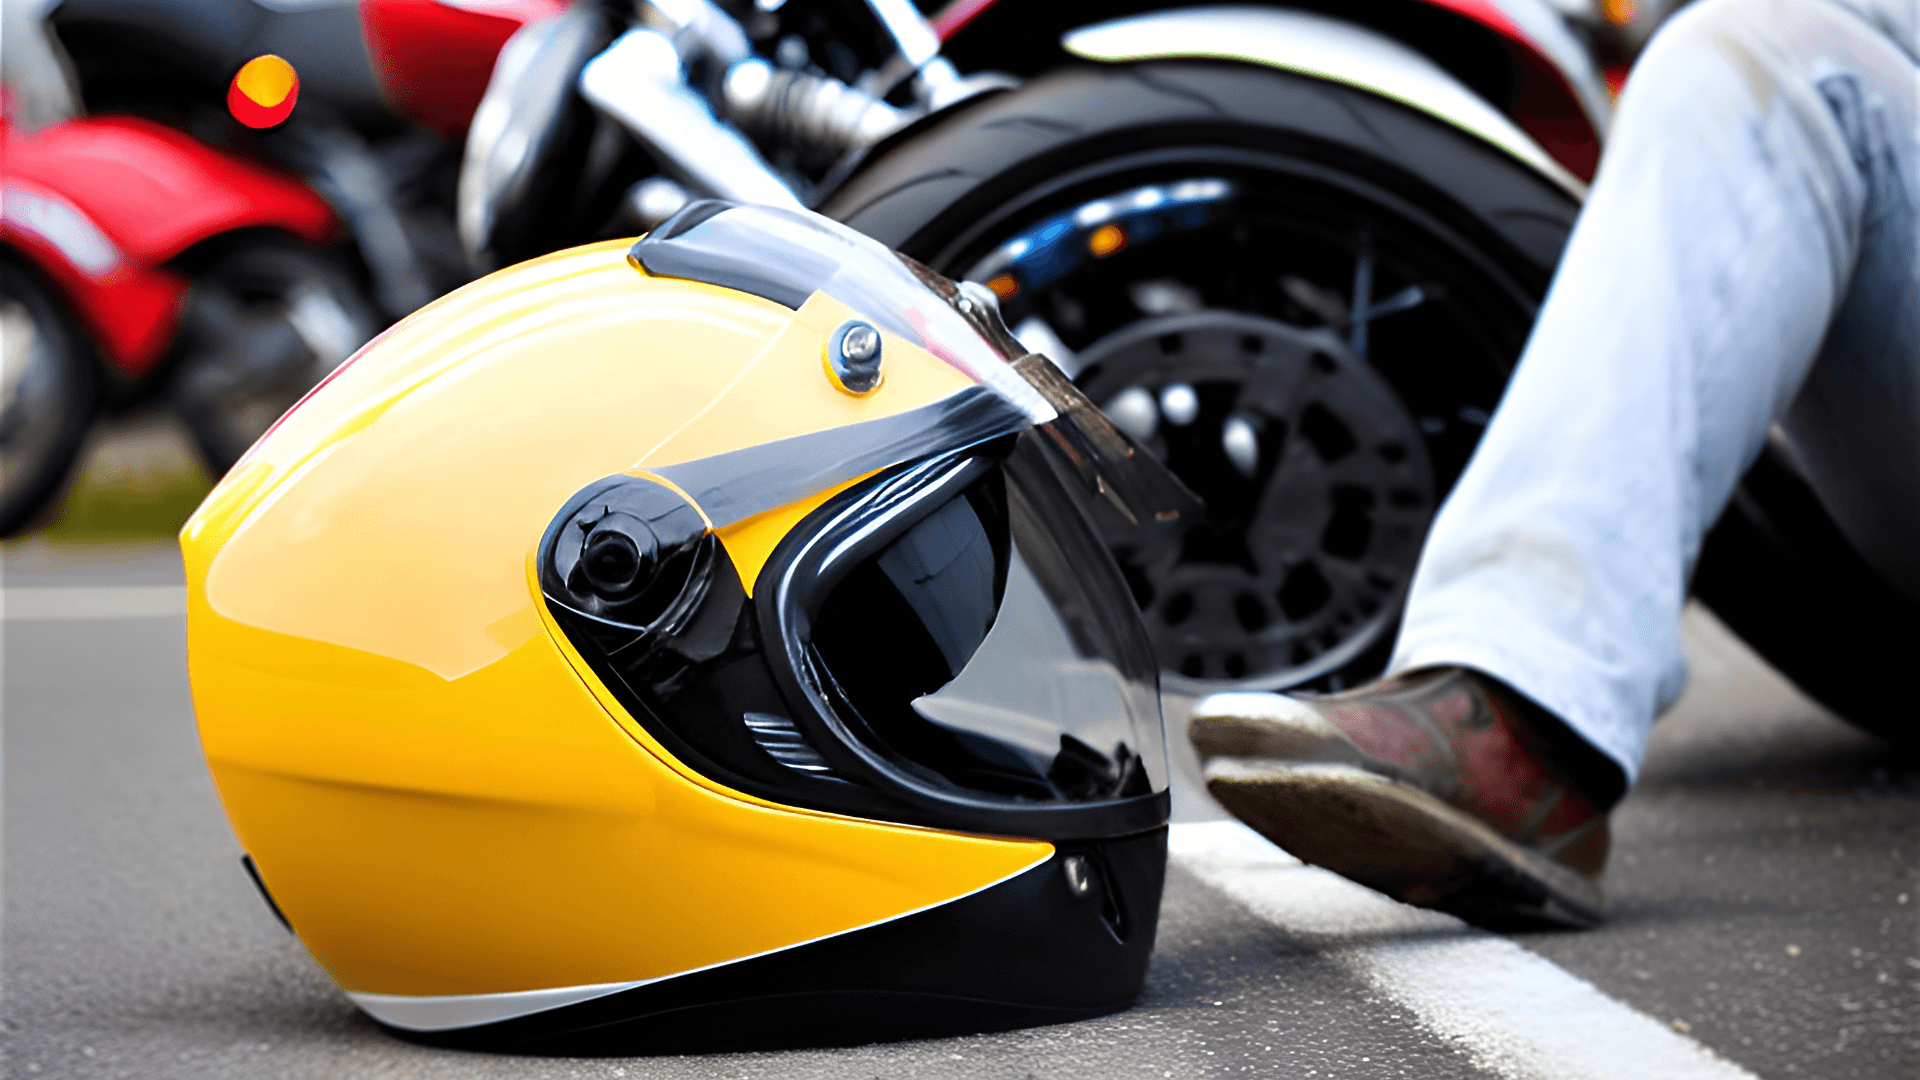 Can I Sue If I'm In a Motorcycle Accident?